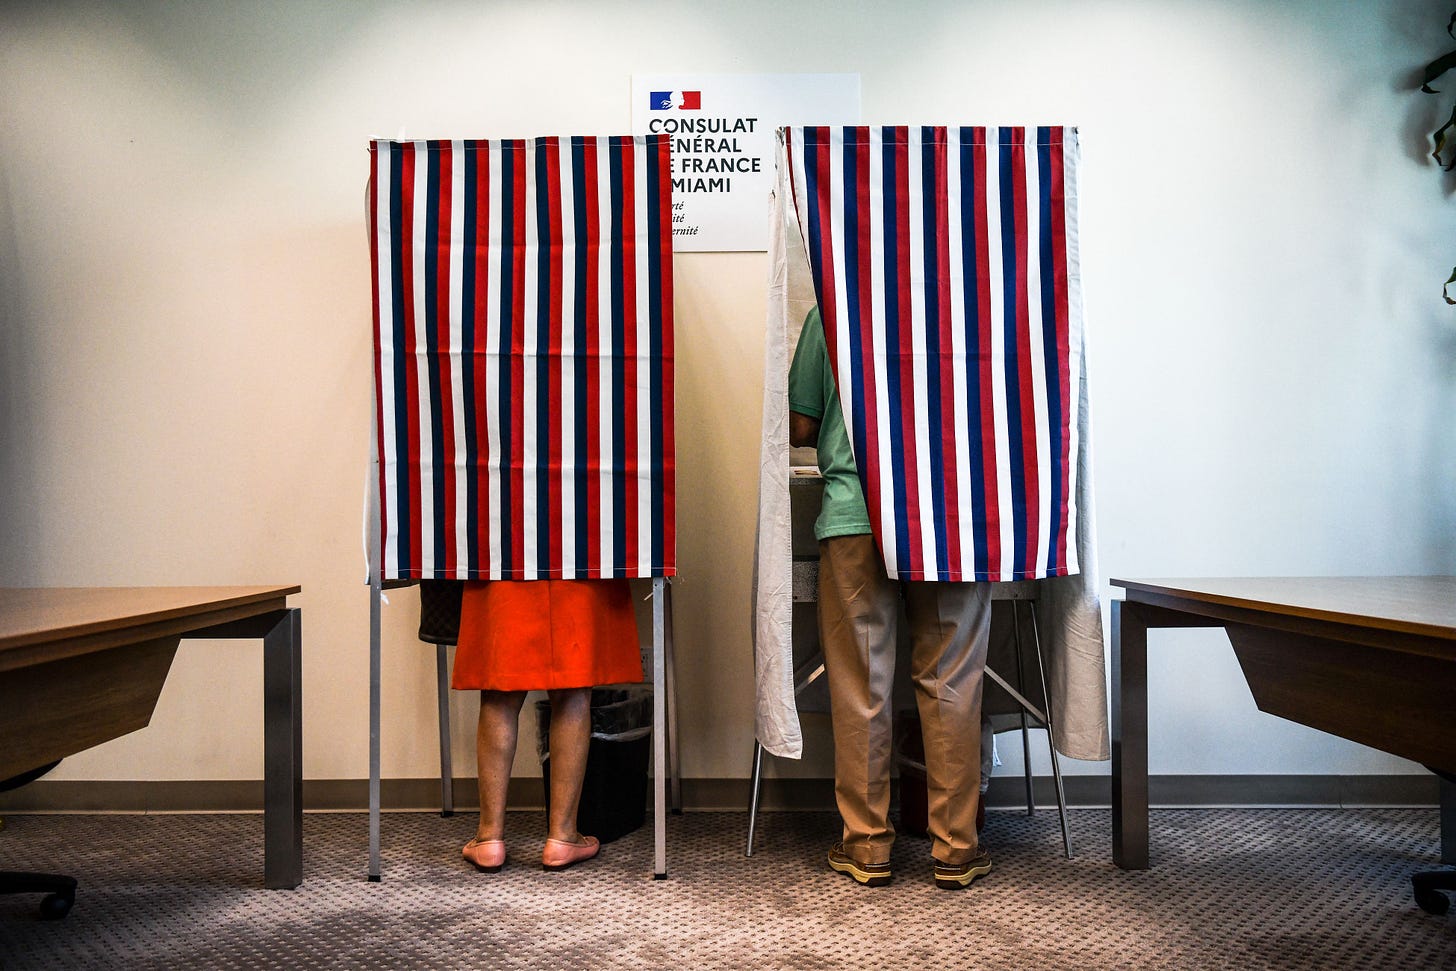 French citizens cast their vote during the Presidential elections at the French Consulate in Miami, Florida, on April 09, 2022. (Photo by CHANDAN KHANNA/AFP via Getty Images)